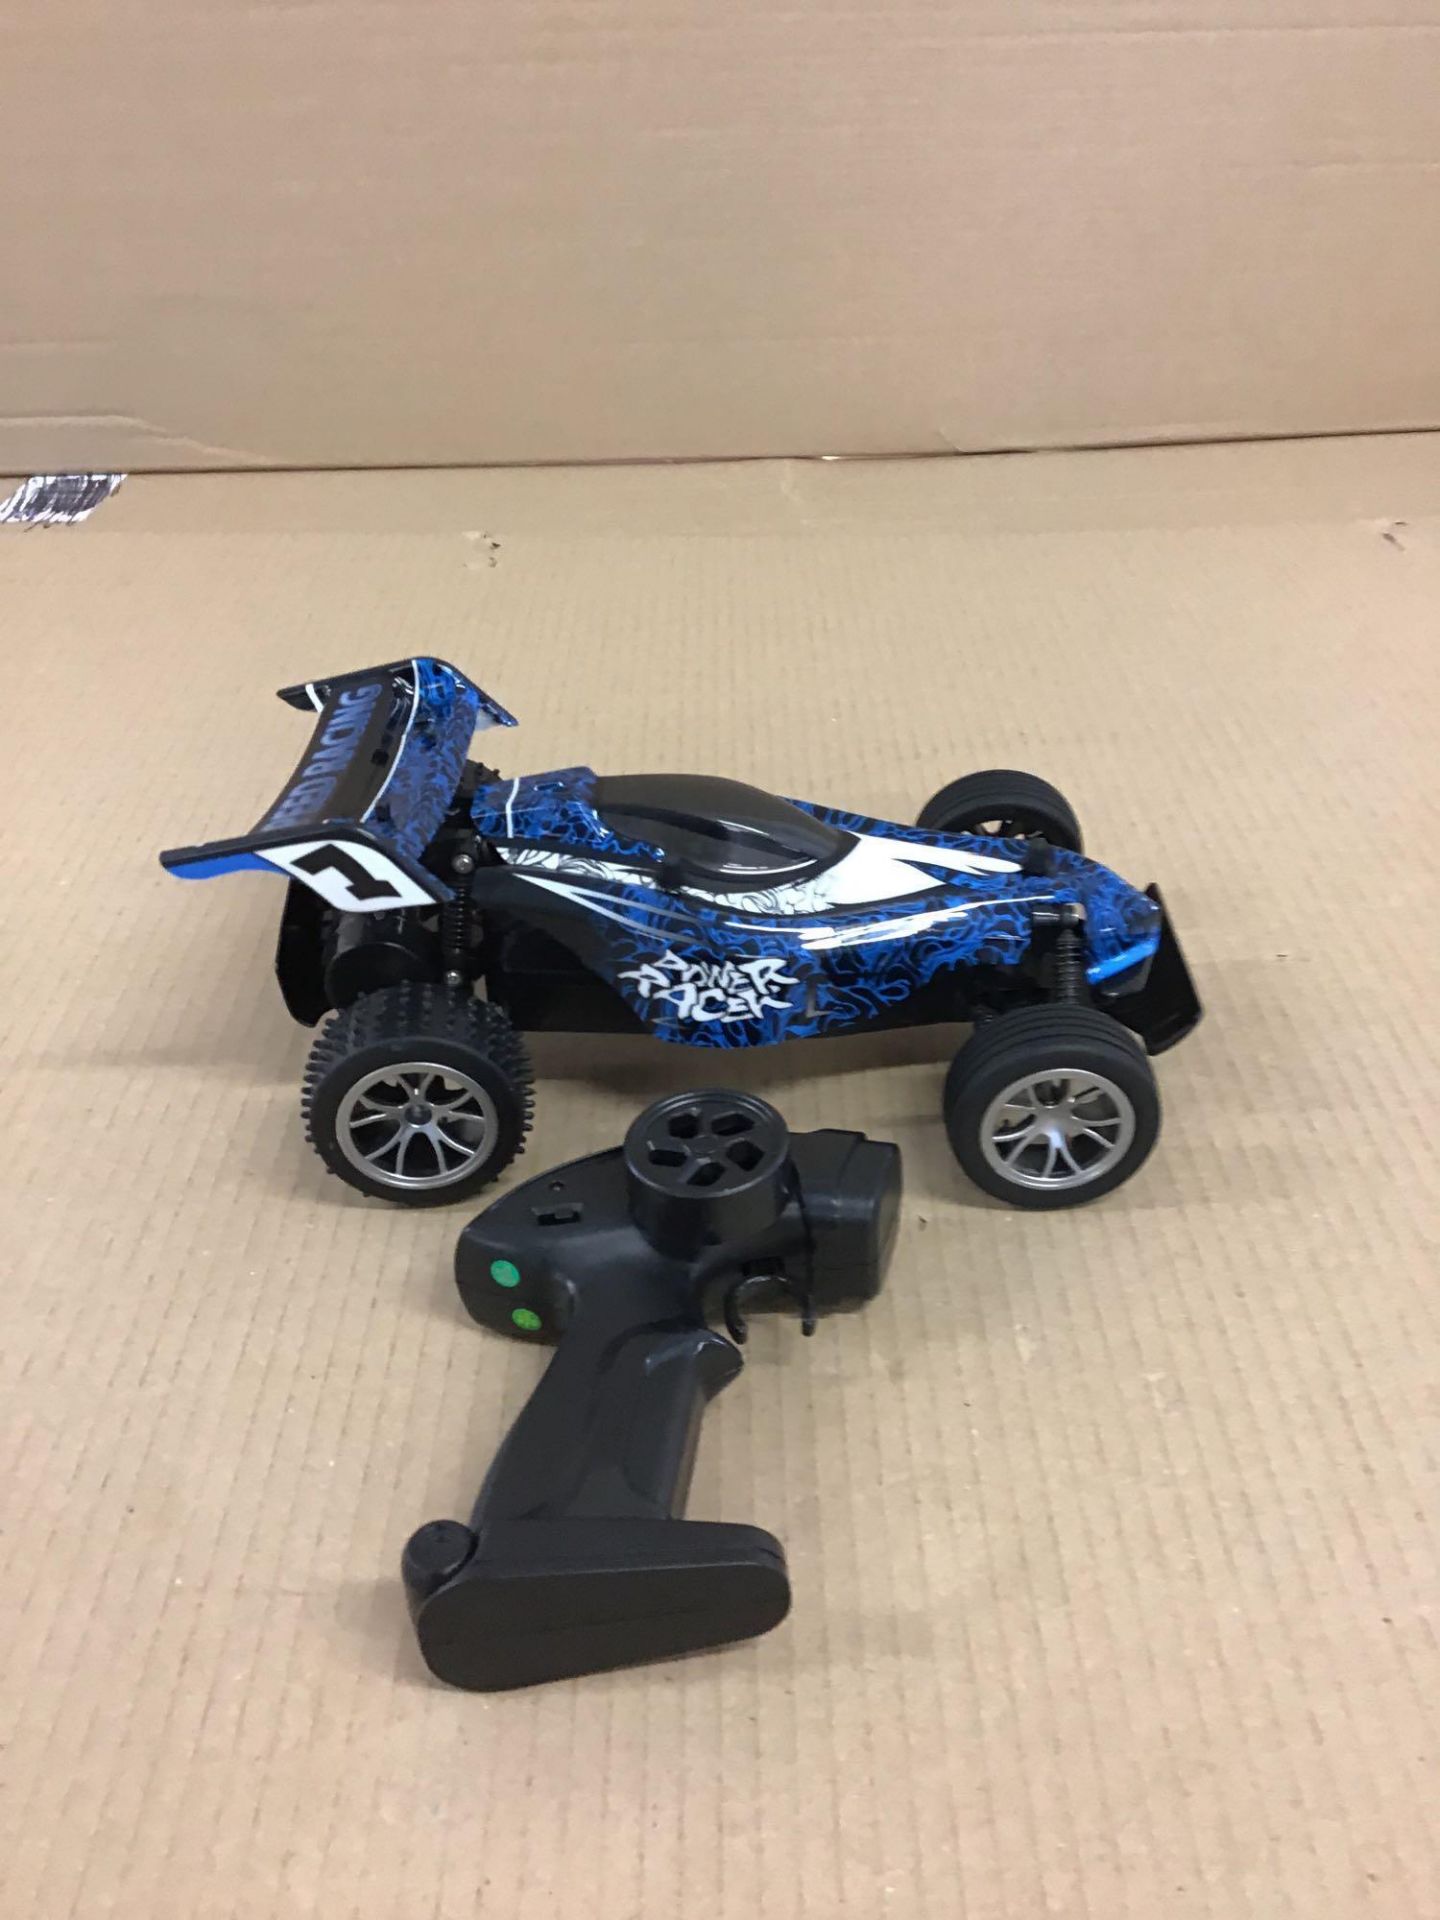 Radio Controlled High Speed Racer 1:16 Scale - Blue 2.4GHZ, £20.00 RRP - Image 2 of 5